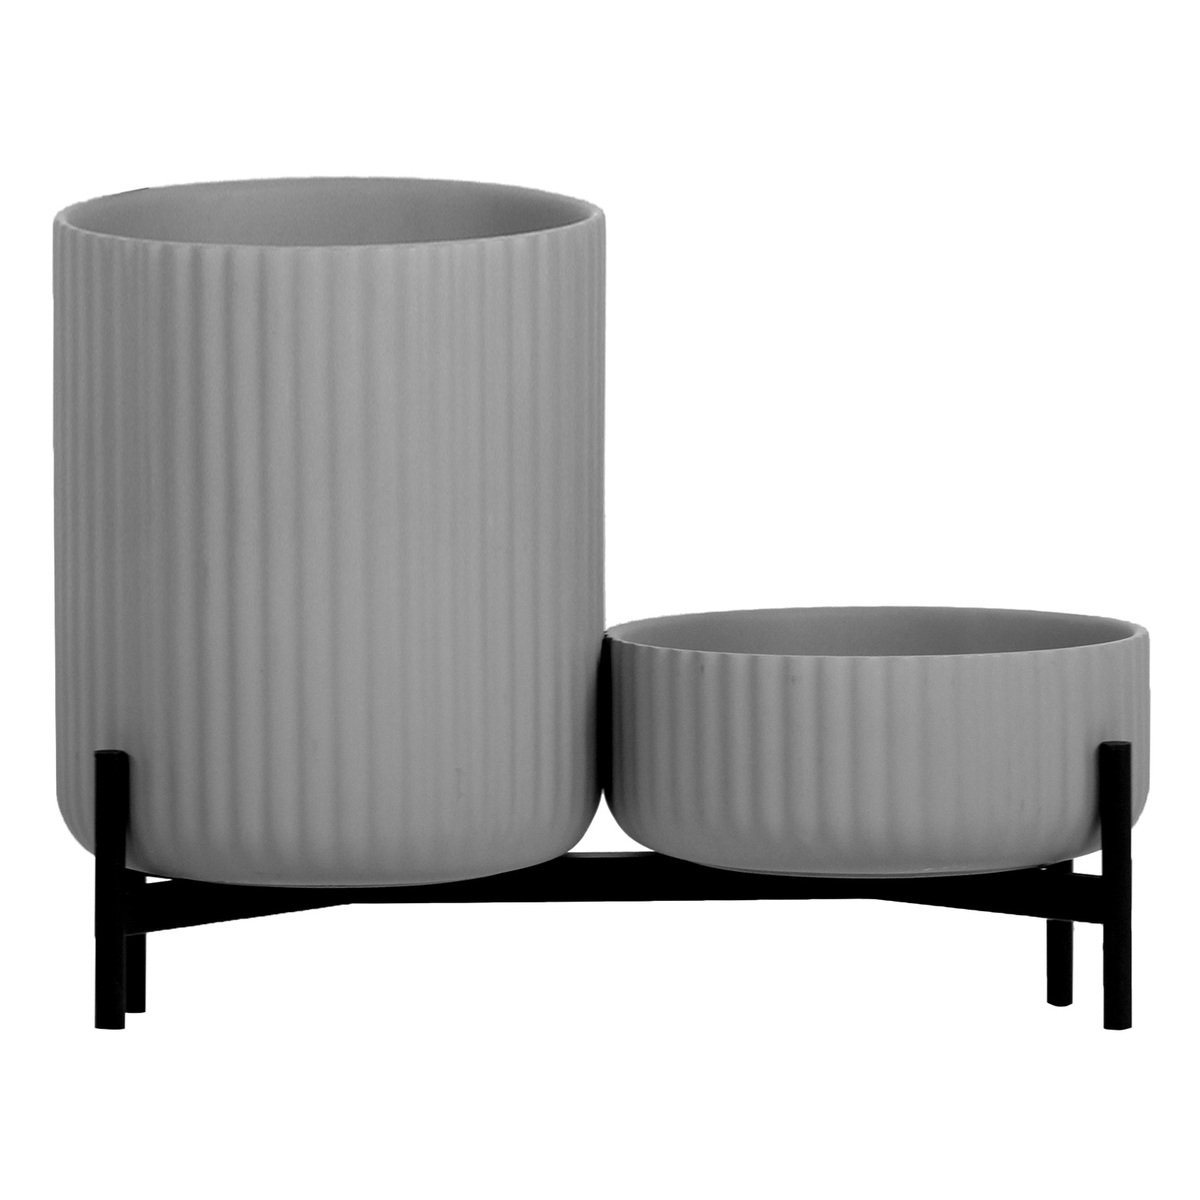 low and Klorofyll Shop | Elementa planter NL grey with Finnish high, Design stand,